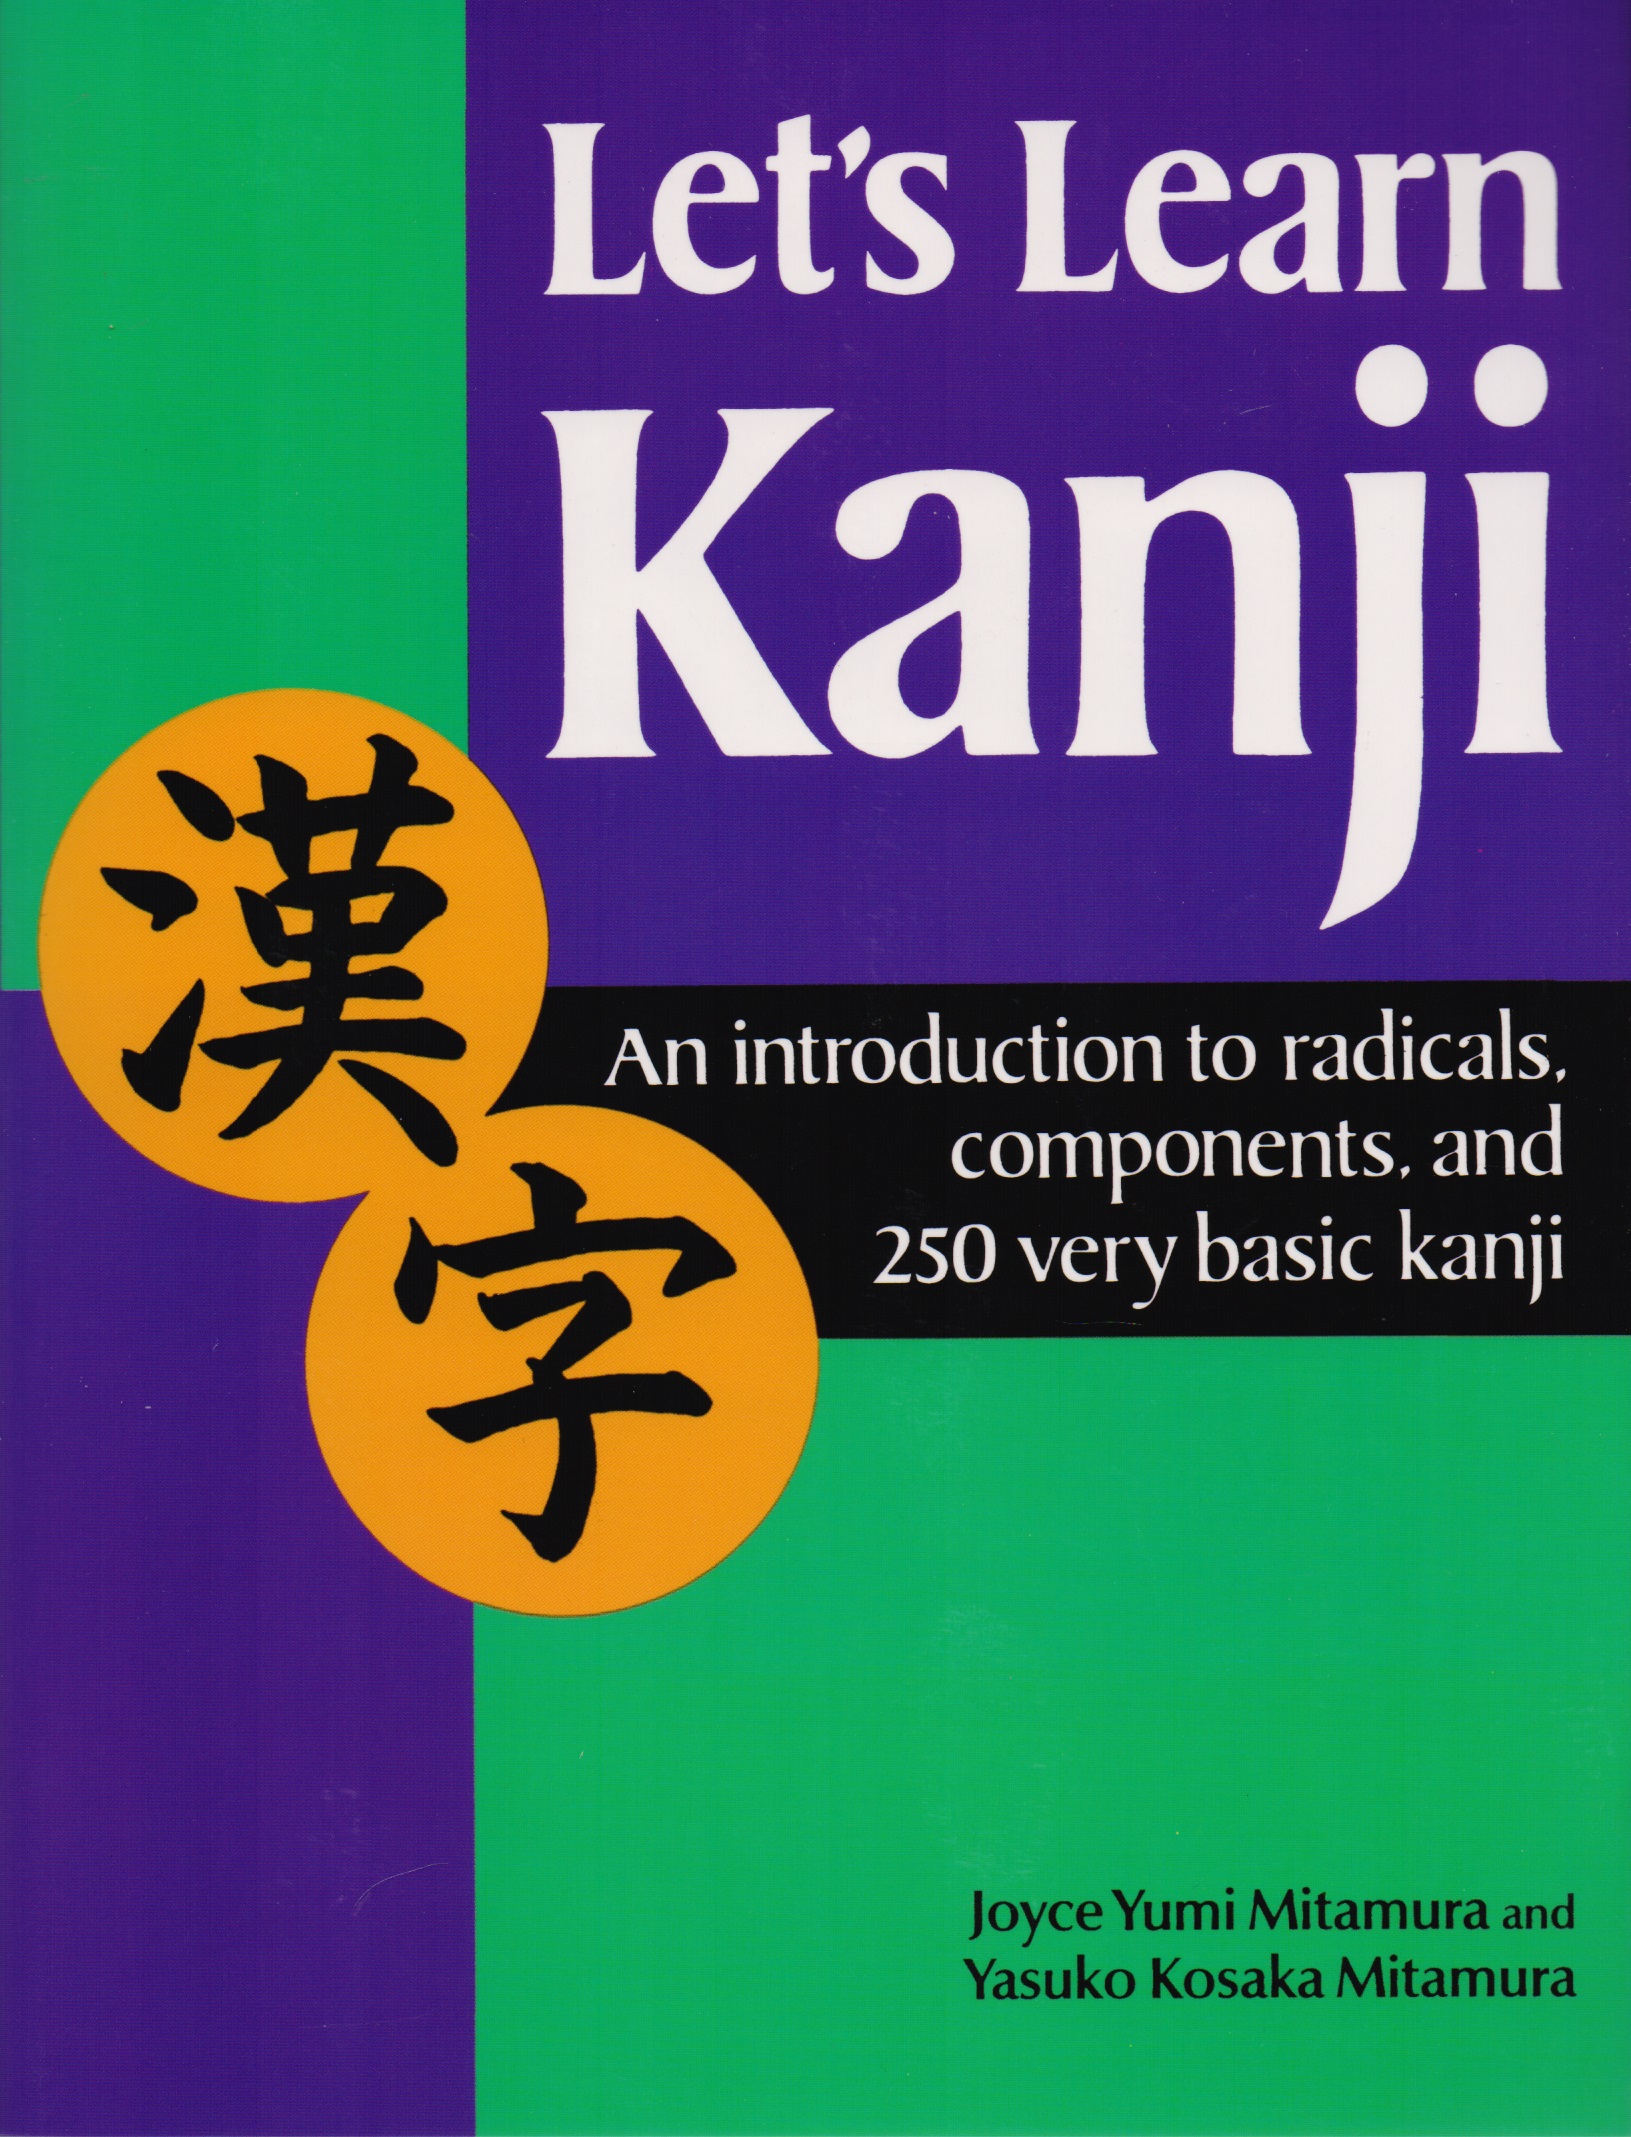 mitamura y mitamura j lets learn kanji an introduction to radicals components and 250 very basic kanji Lets Learn Kanji: An Introduction to Radicals, Components and 250 Very Basic Kanji 